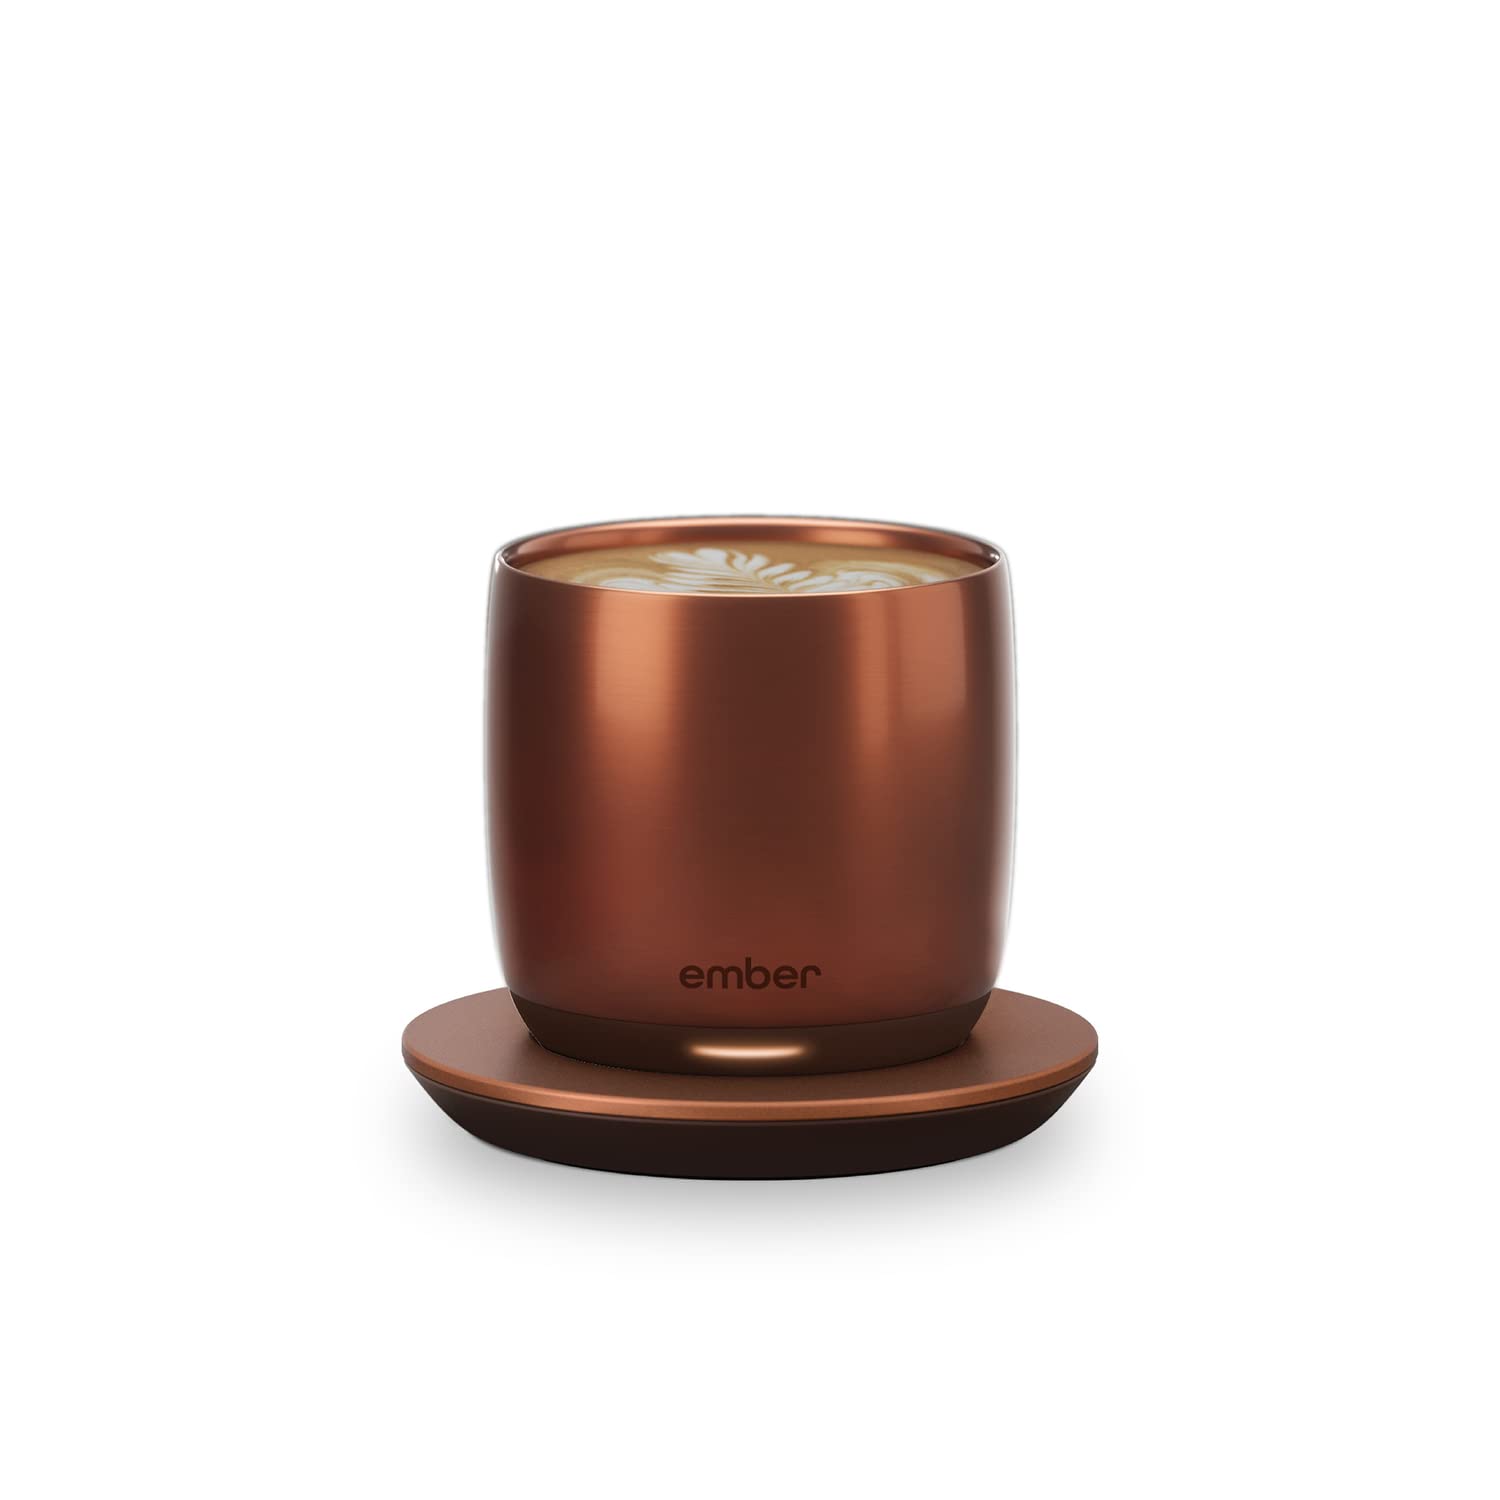 Ember - Temperature Control Smart Cup, 6 oz, App-Controlled Heated Coffee Cup, Espresso Mug with 90 Min Battery Life, Copper